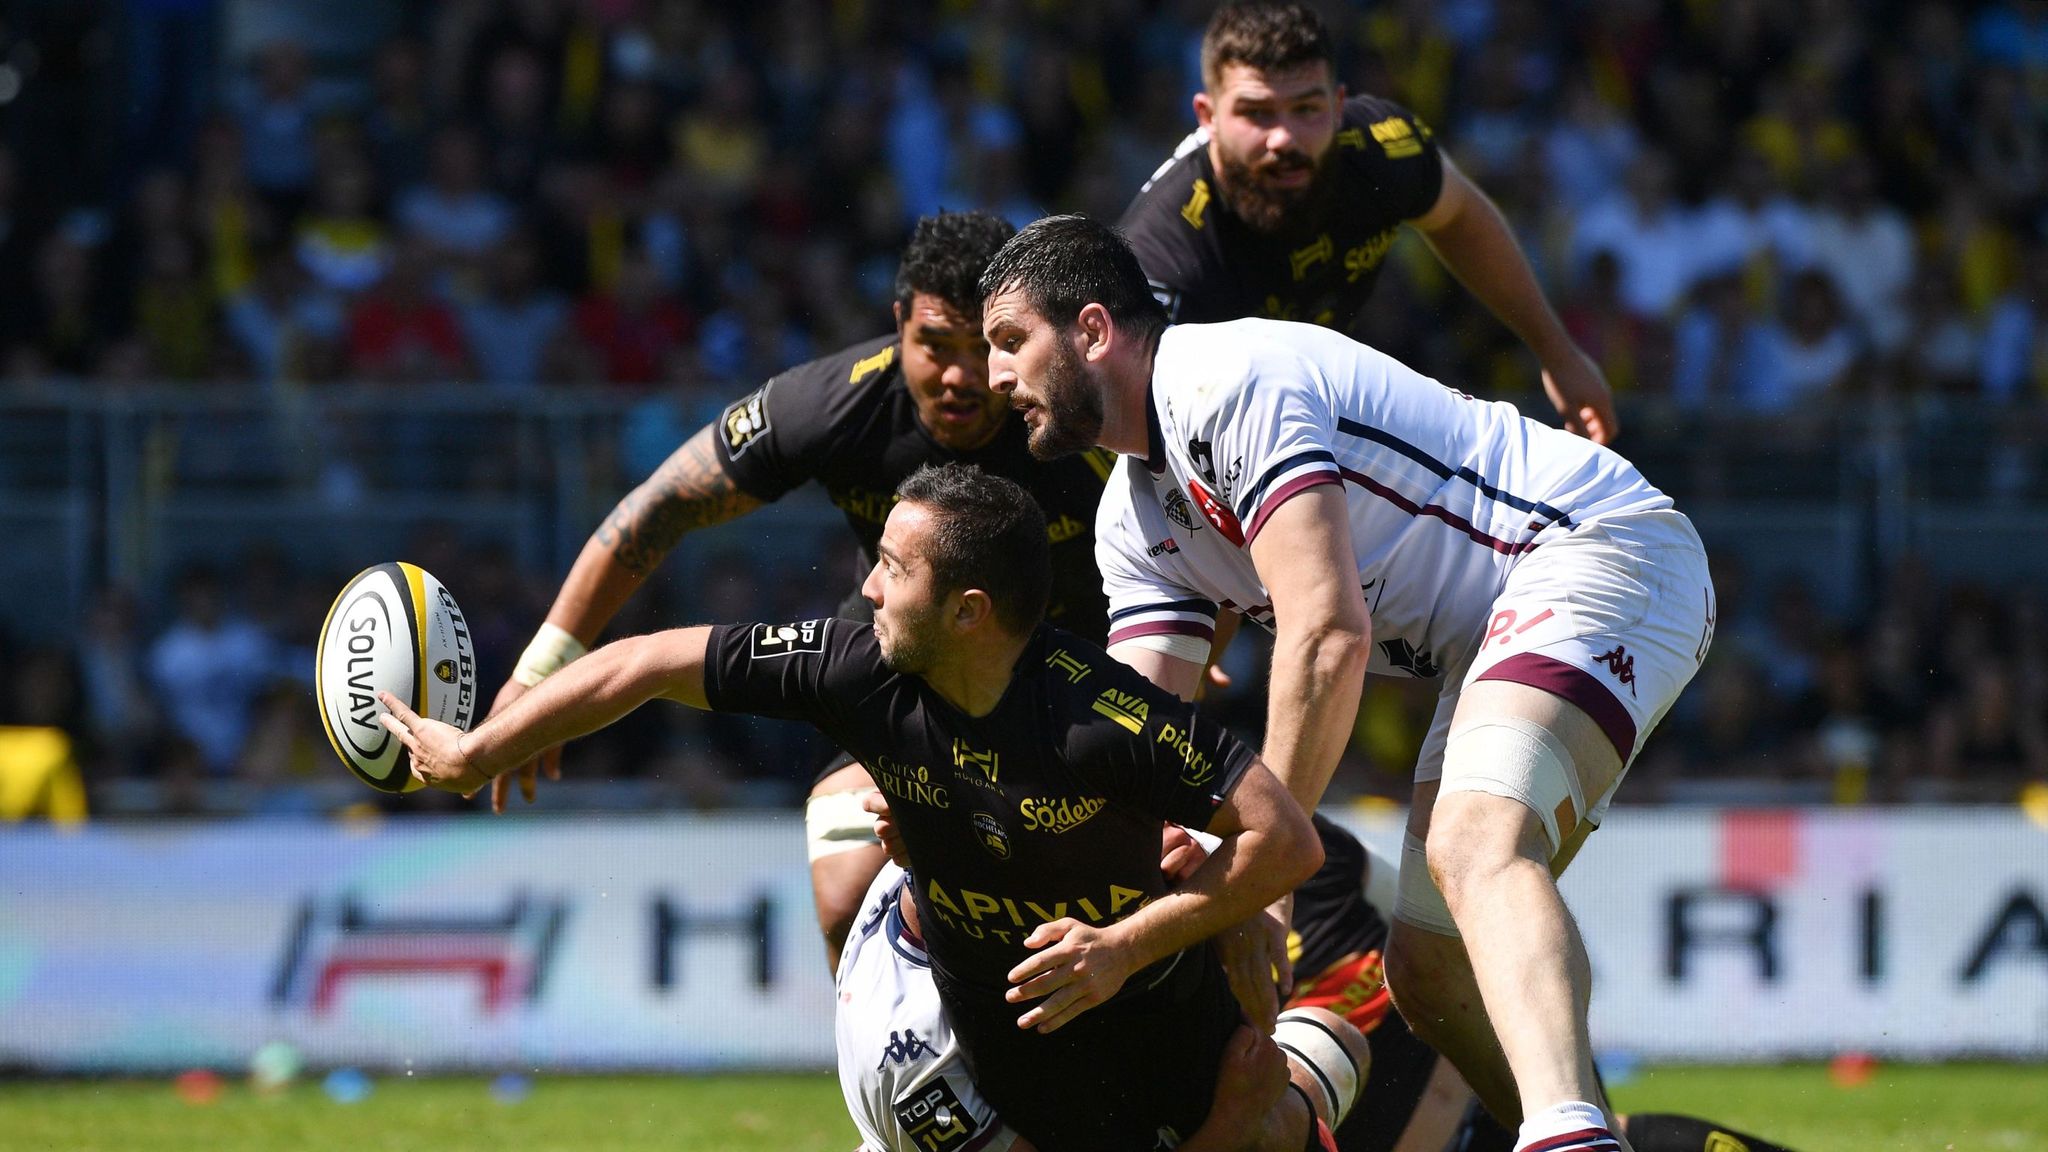 TOP14 round-up La Rochelle extend their lead and Bayonne relegated Rugby Union News Sky Sports